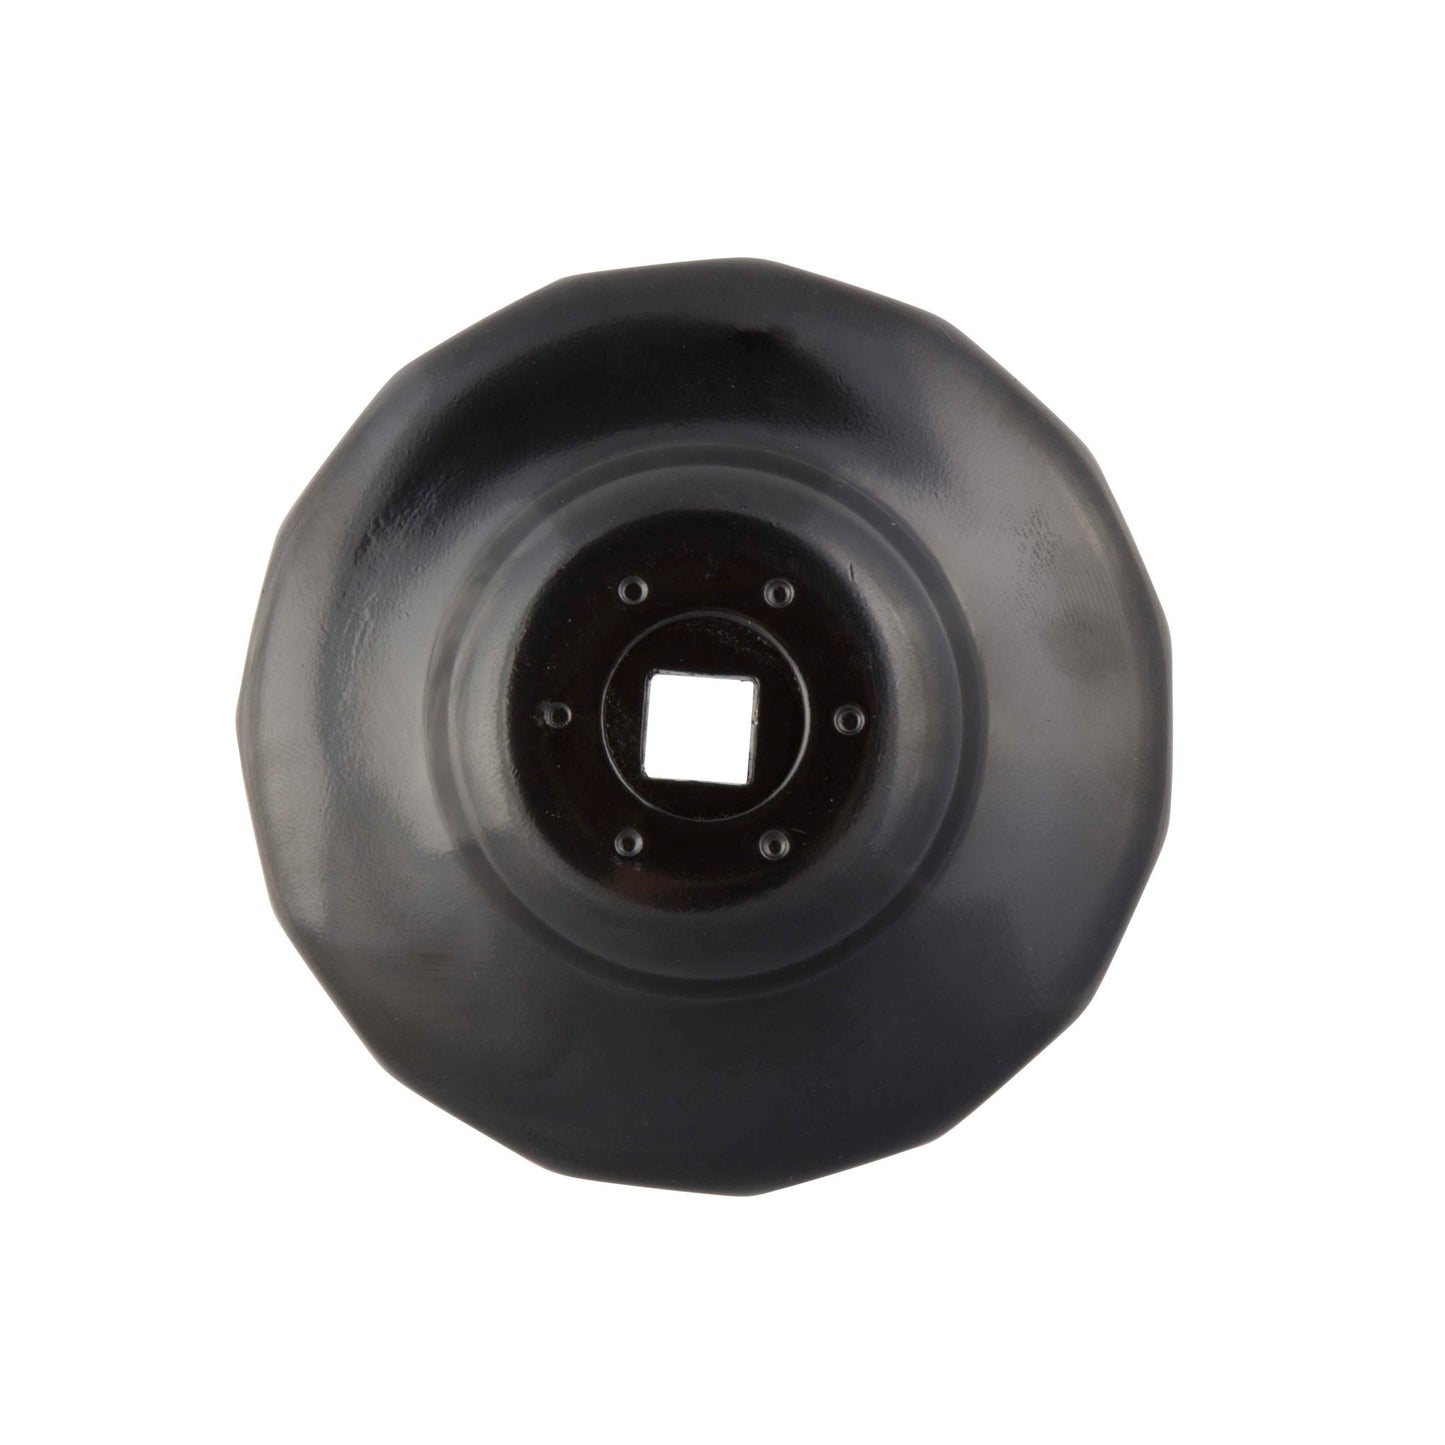 Oil Filter Cap Wrench 90mm x 15 Flute